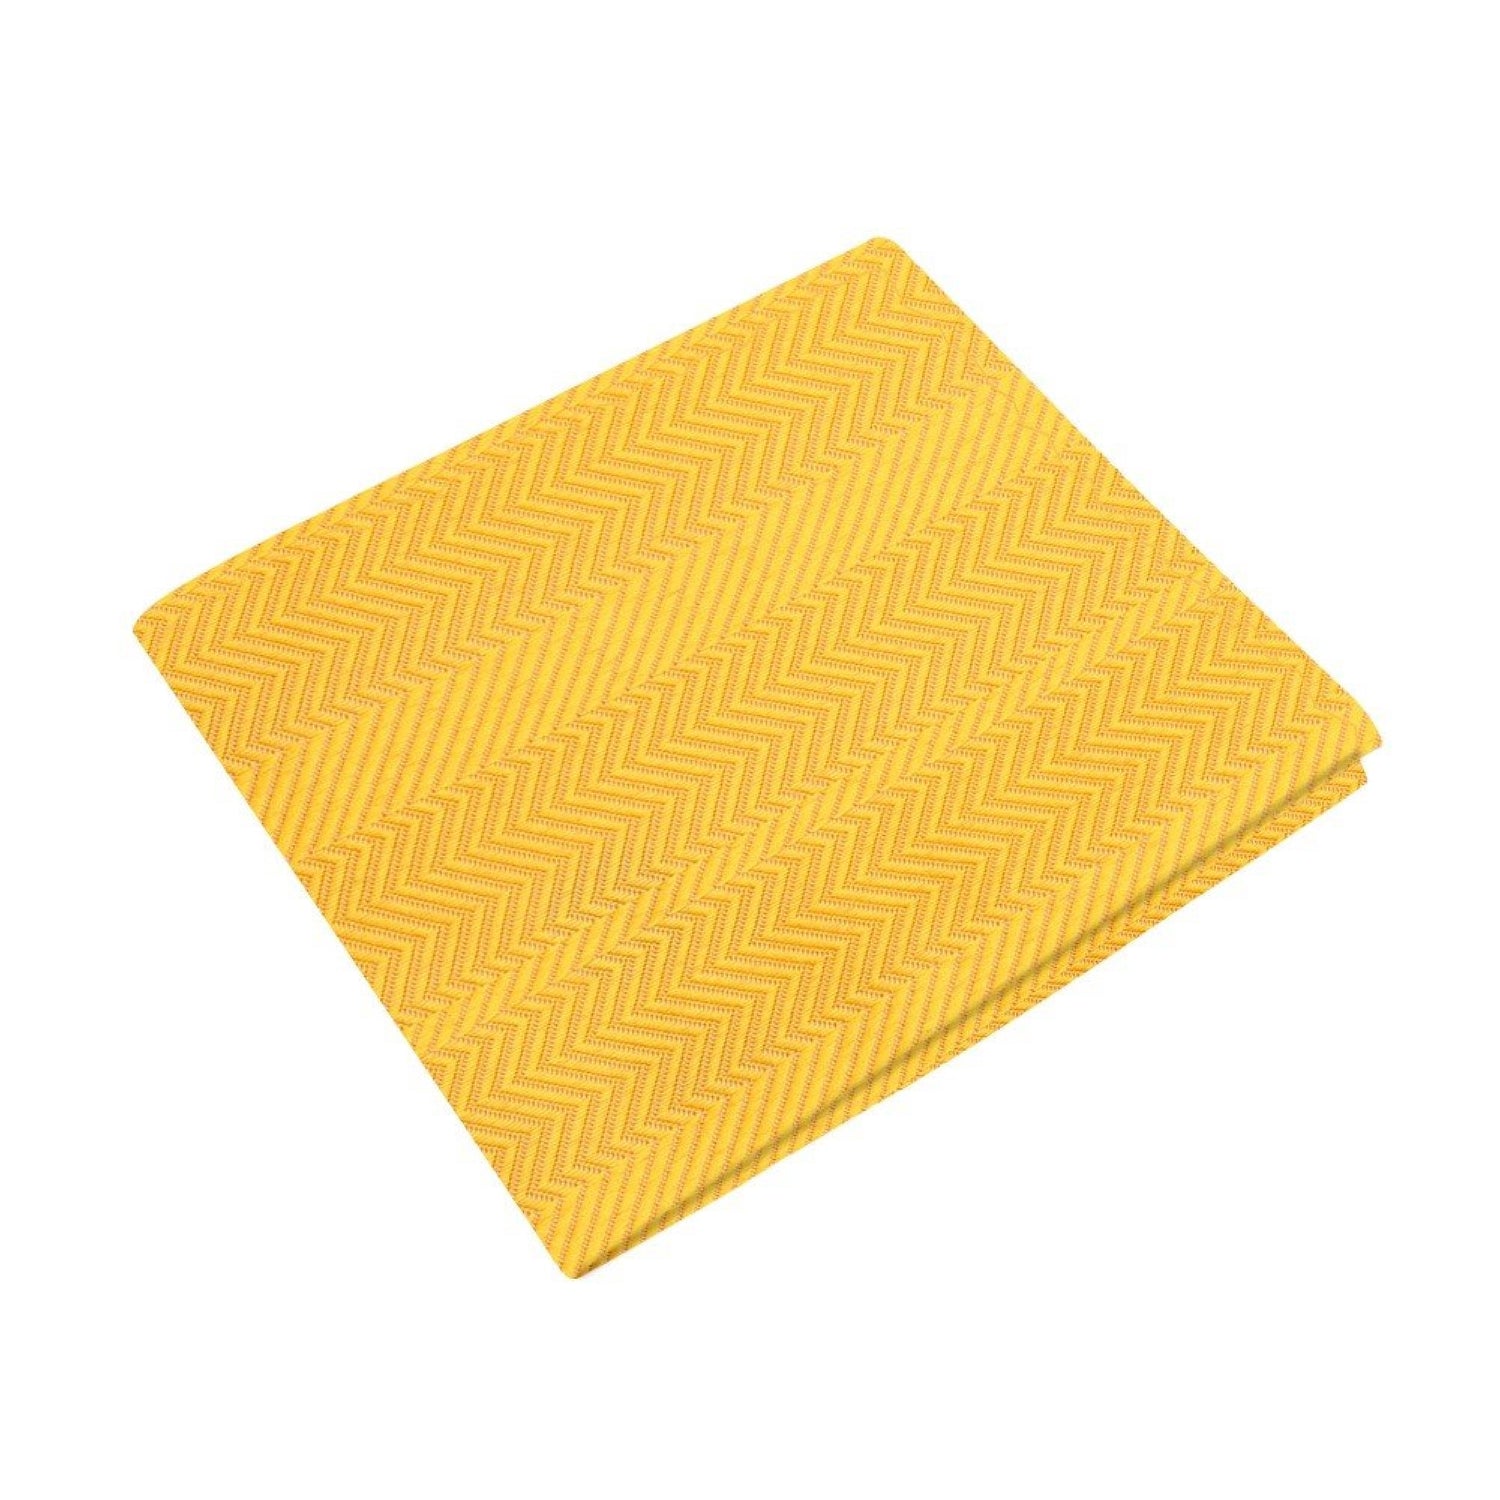 A Solid Tuscany Yellow Color with Sophisticated Lined Texture Silk Pocket Square